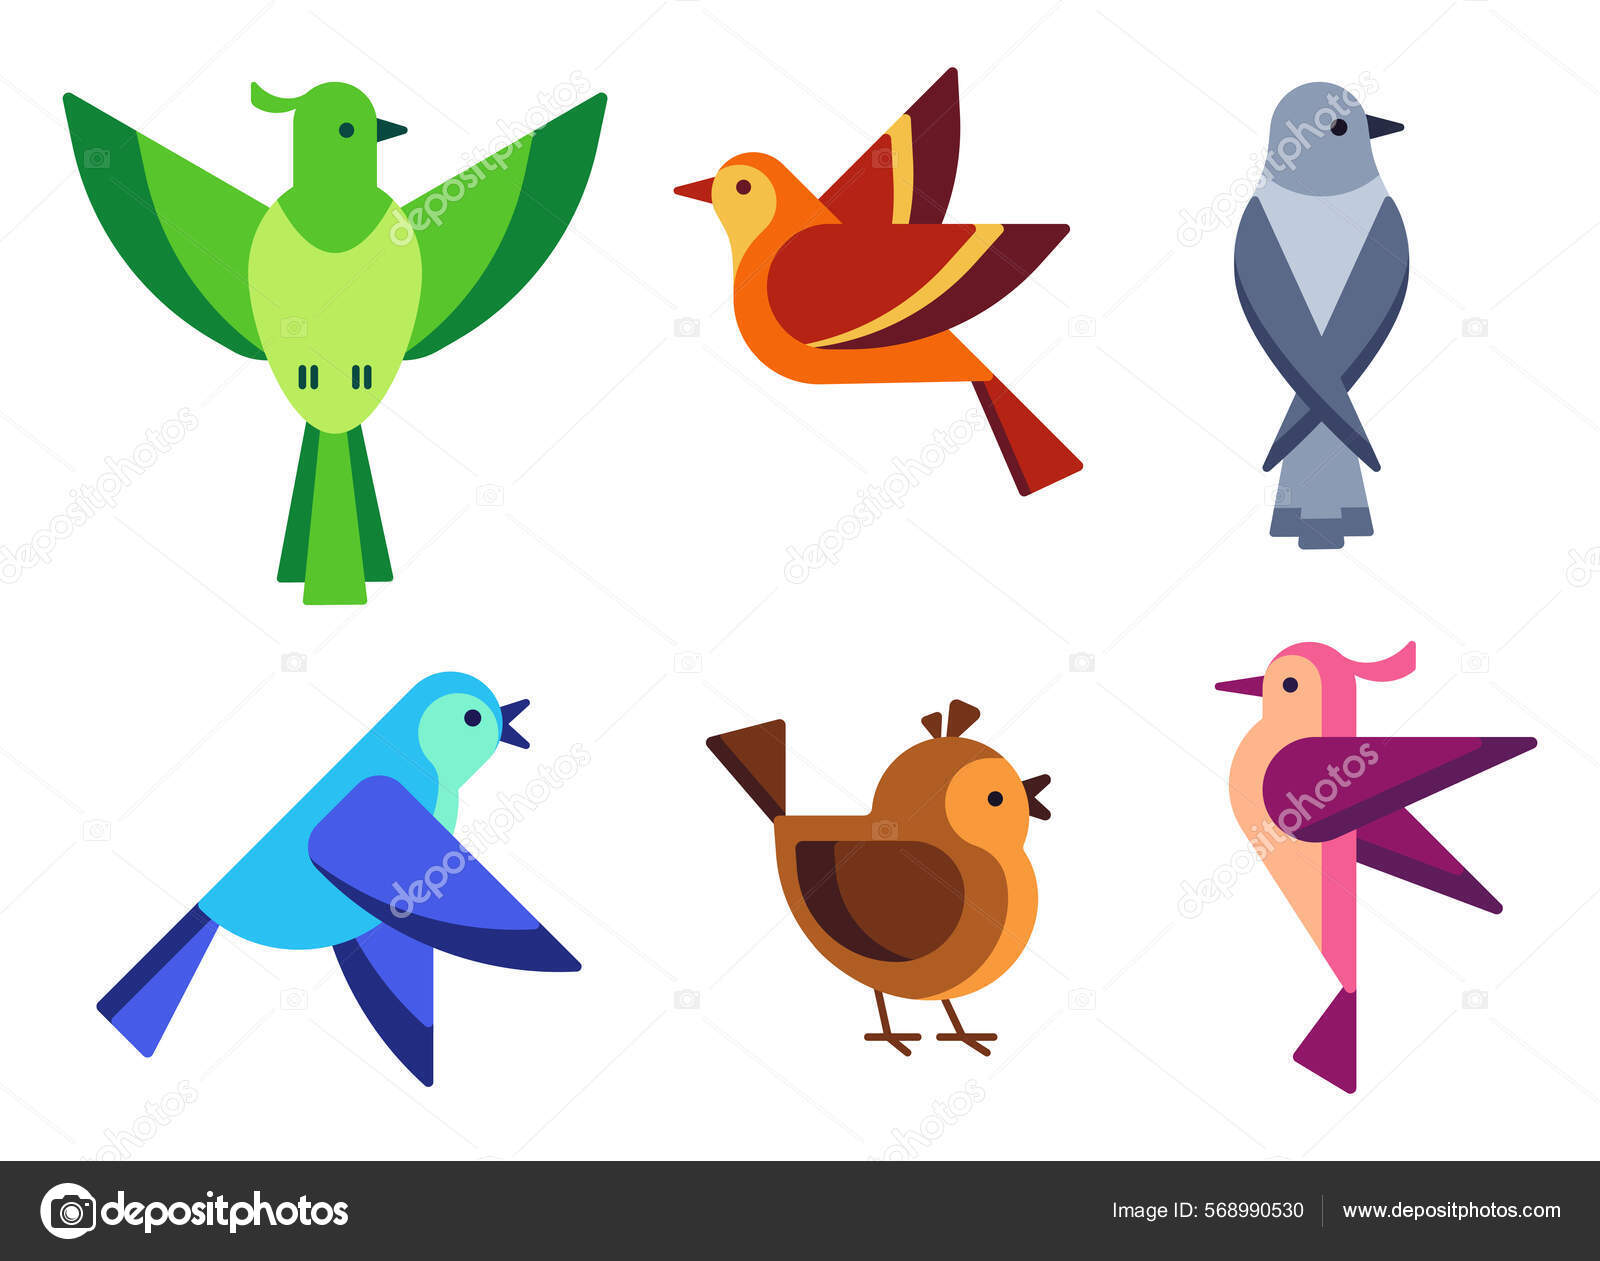 Colored bird feathers isolated on the alpha Vector Image